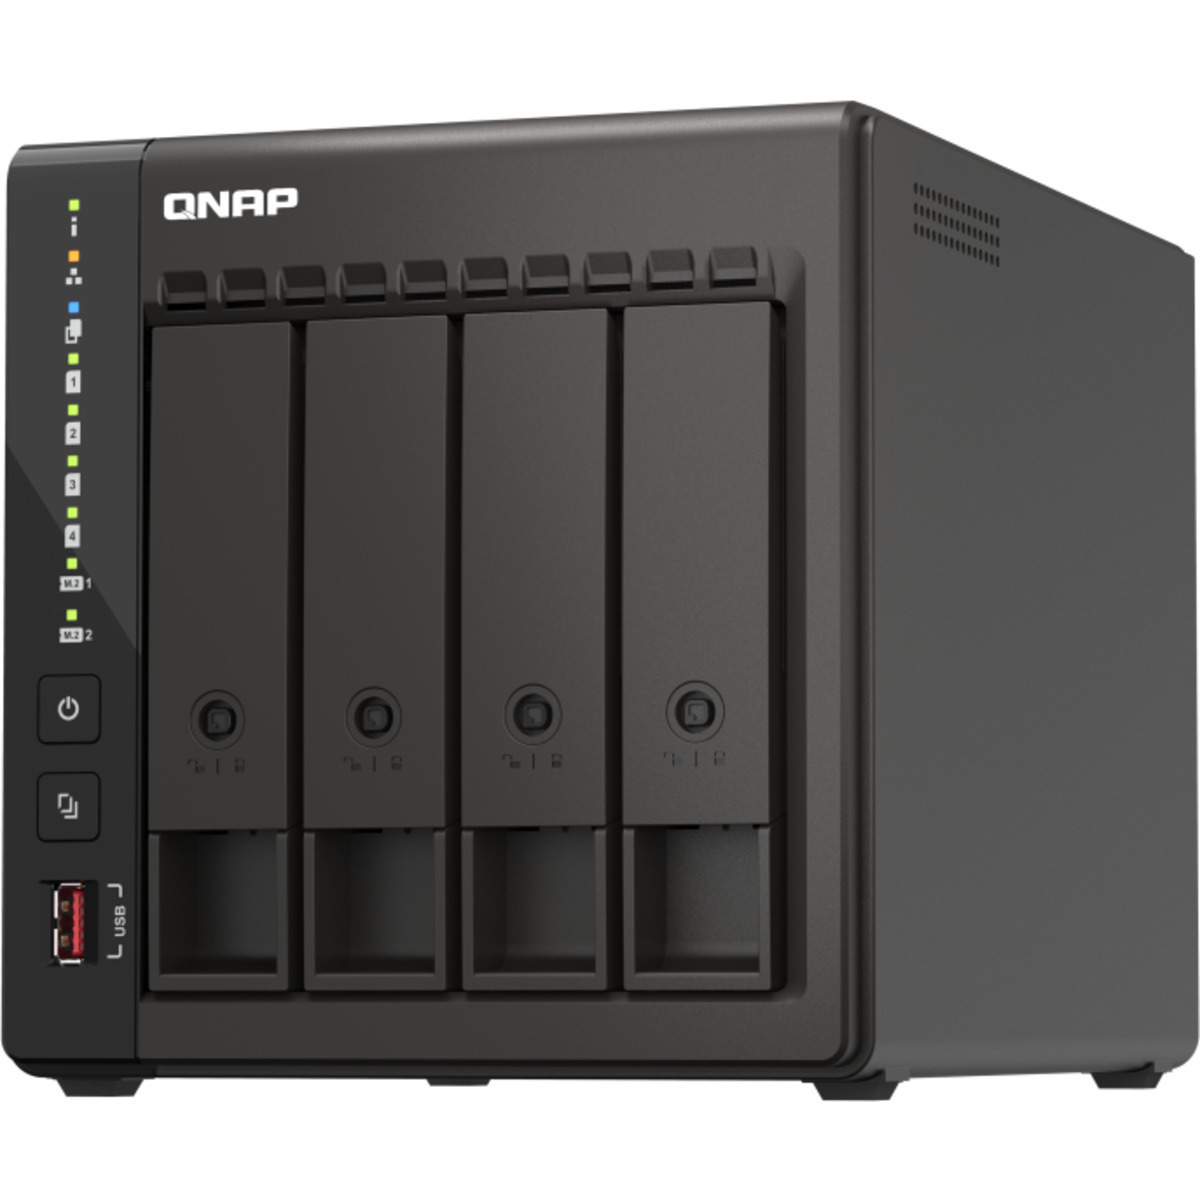 QNAP TS-453E 20tb 4-Bay Desktop Multimedia / Power User / Business NAS - Network Attached Storage Device 2x10tb Seagate EXOS X18 ST10000NM018G 3.5 7200rpm SATA 6Gb/s HDD ENTERPRISE Class Drives Installed - Burn-In Tested TS-453E